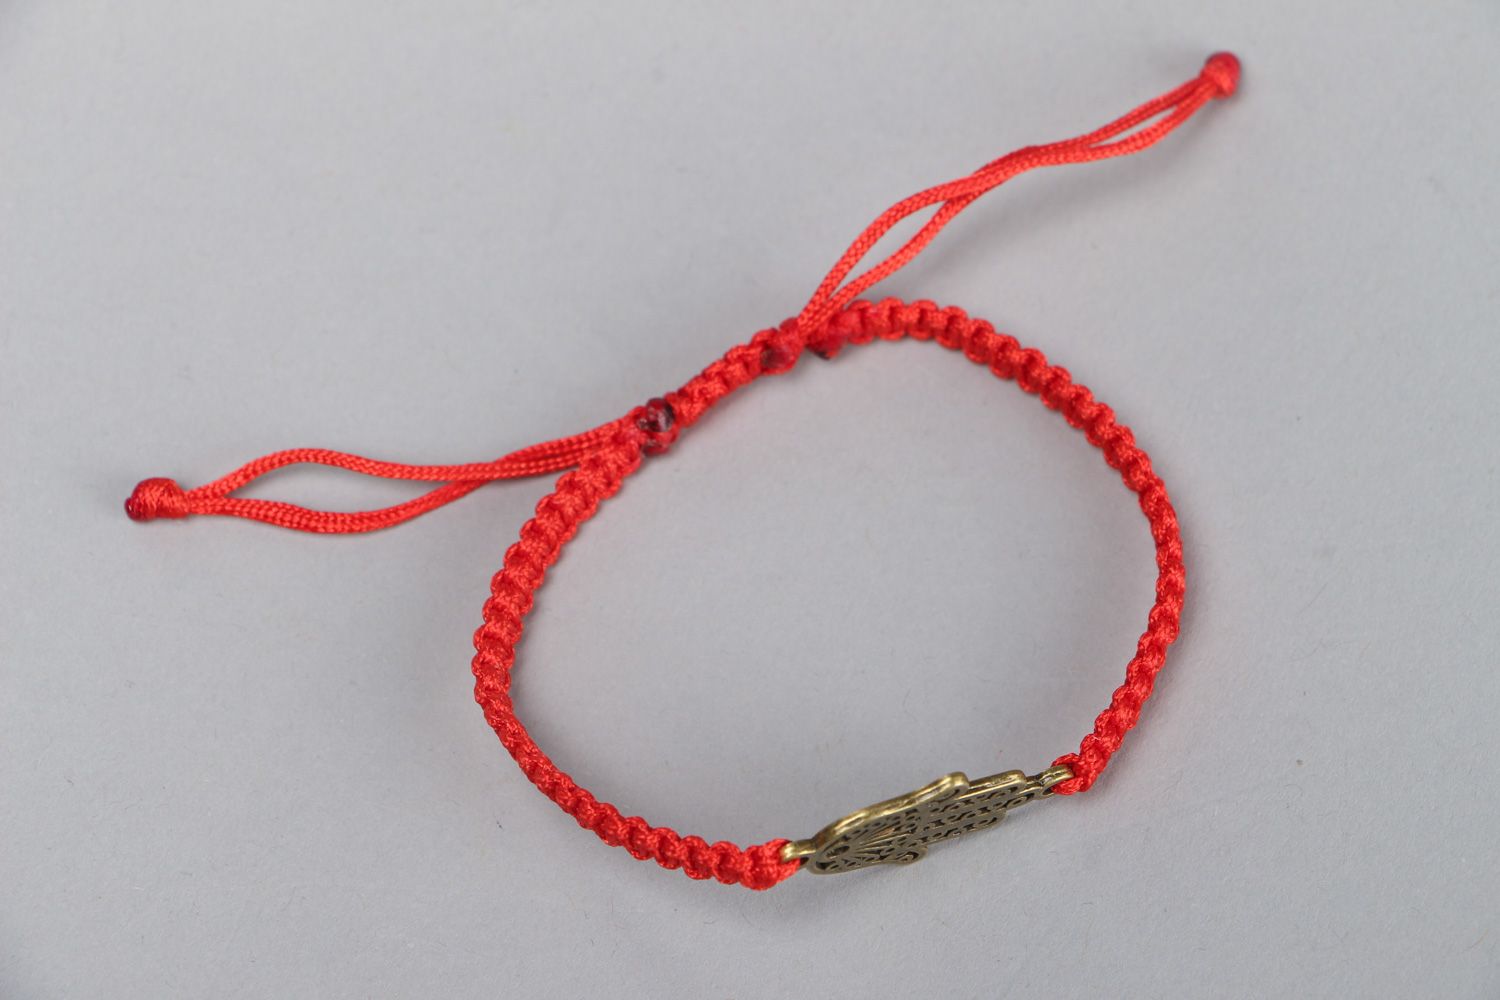 Thin handmade wrist friendship bracelet of red color with metal charm unisex photo 1